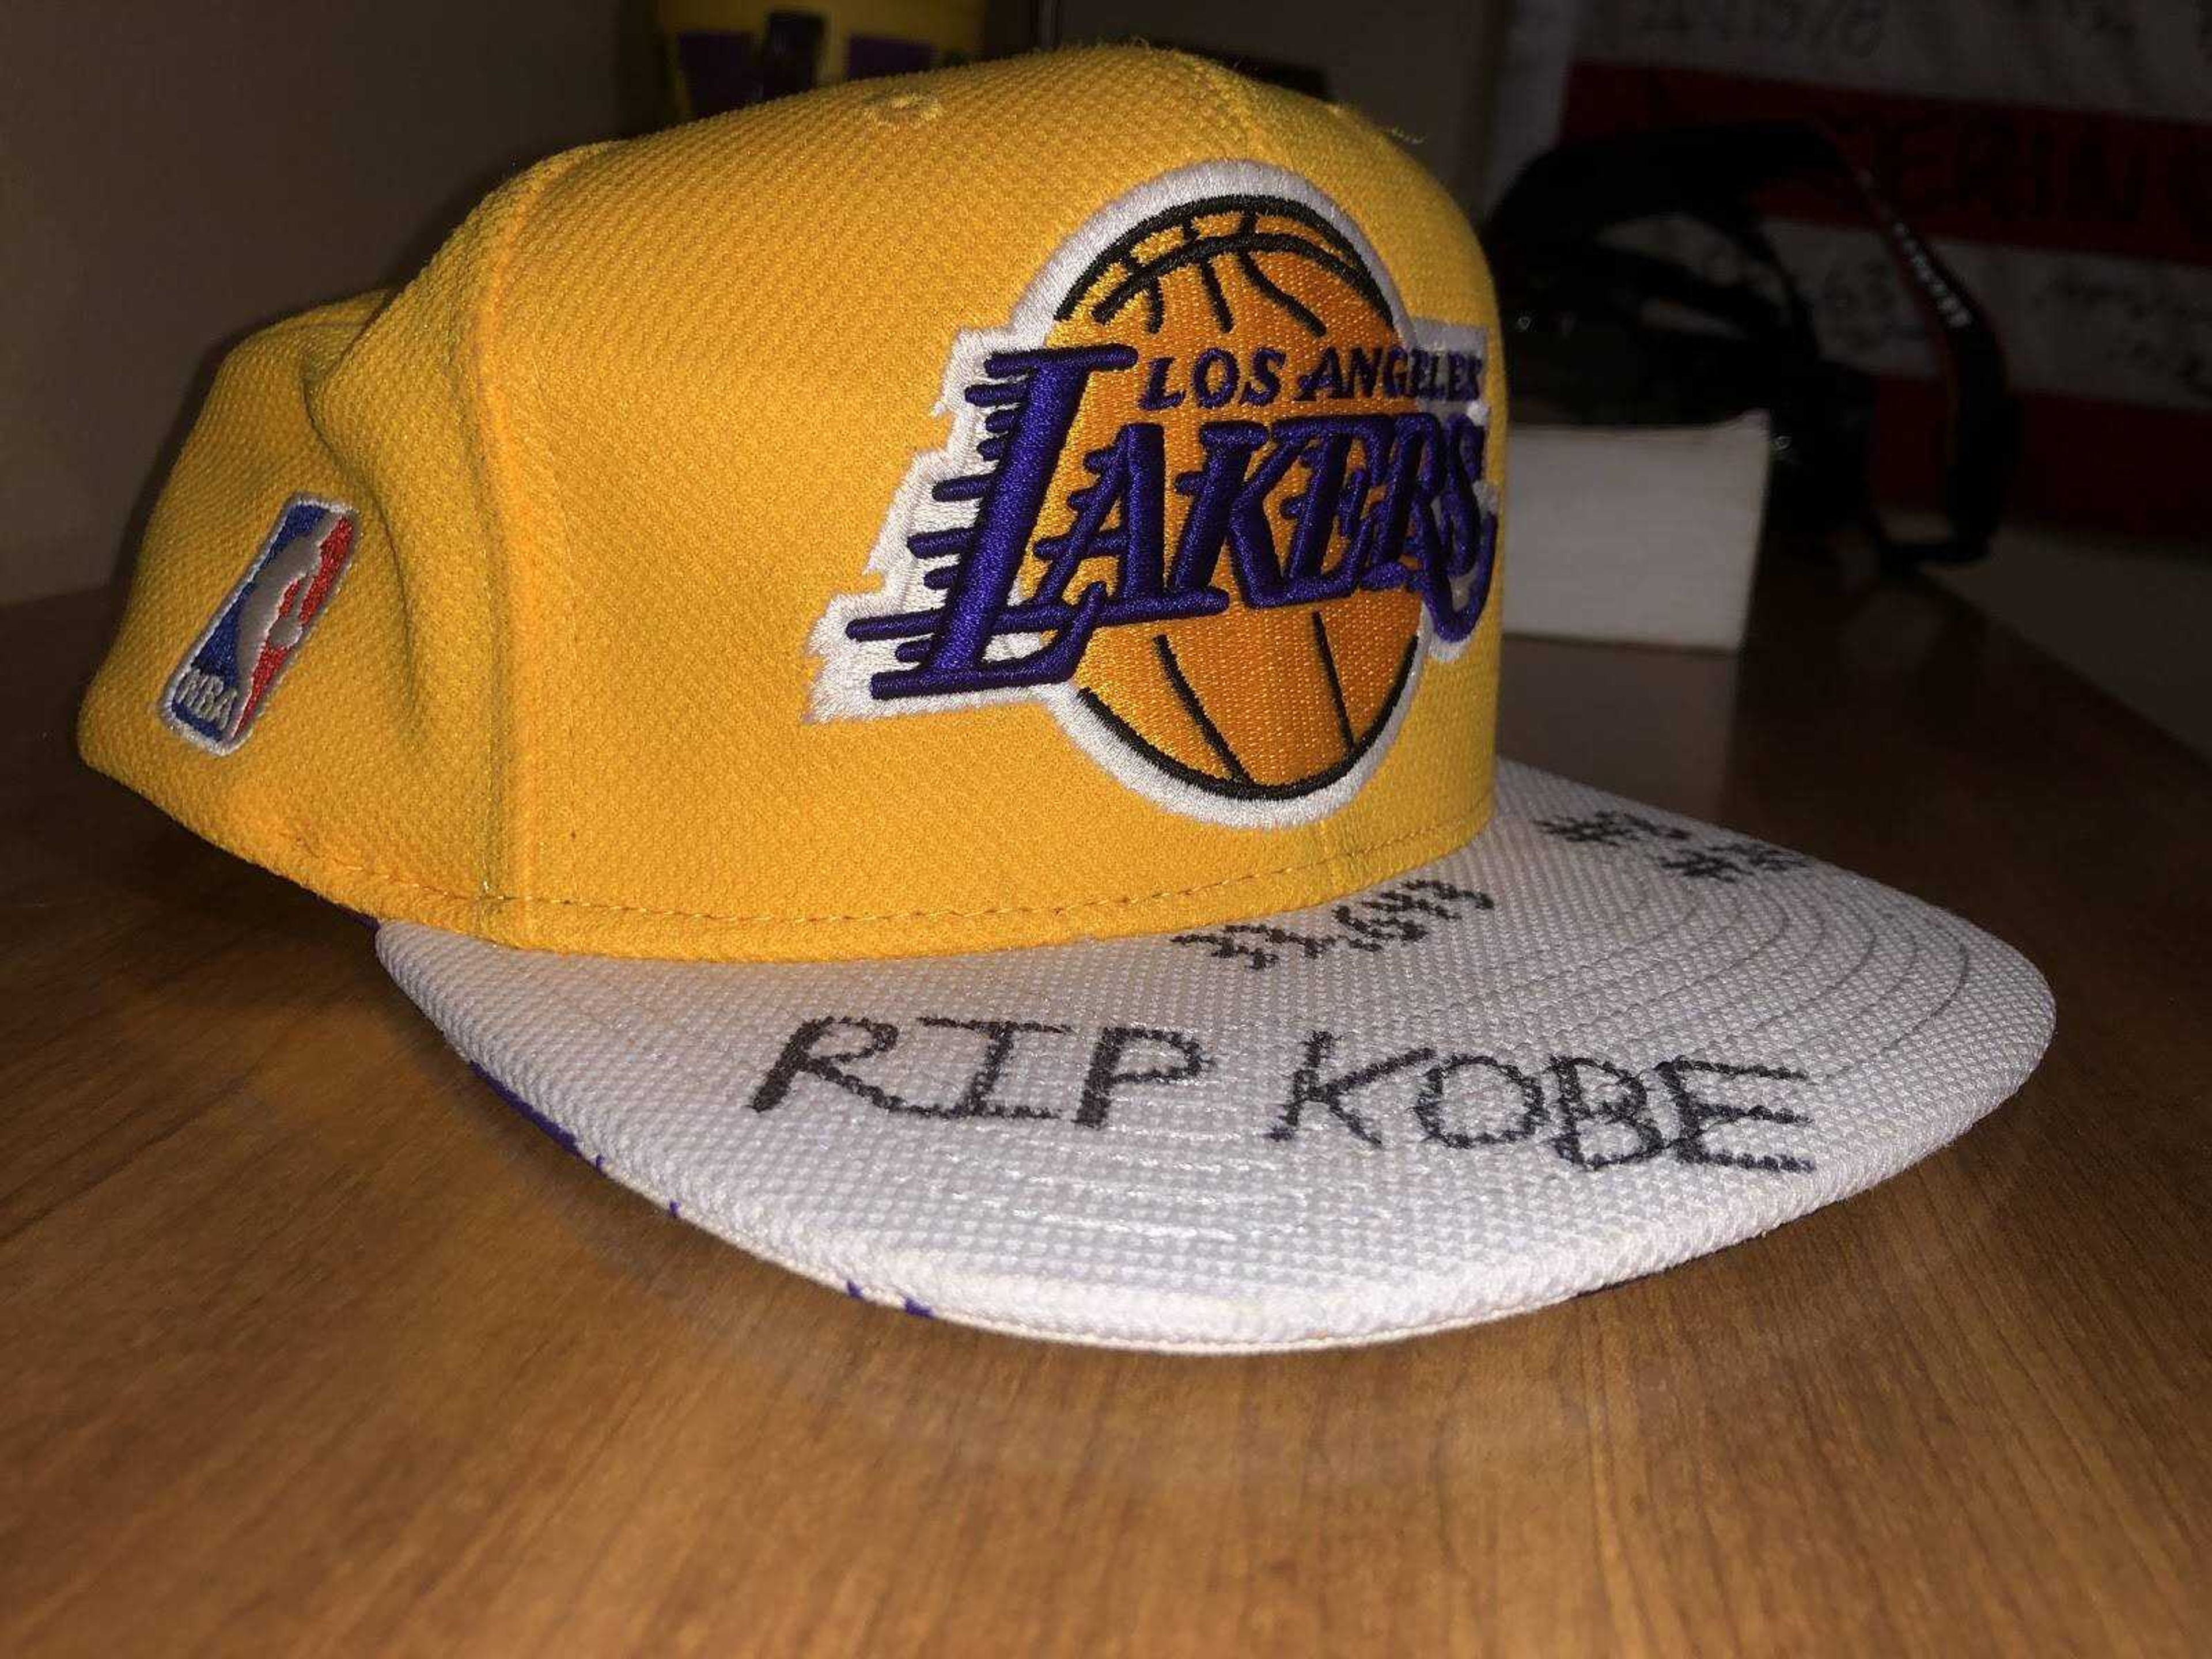 A Los Angeles Lakers hat with “RIP KOBE” written in large print on the top of the bill. Both “#8” and “#24” are written on the right side of the hat for the two numbers Kobe Bryant wore during his 20 year career. The number “33,463” is written at the center of the hat for the number of points Bryant scored in his career, fourth-most in the history of the National Basketball Association.